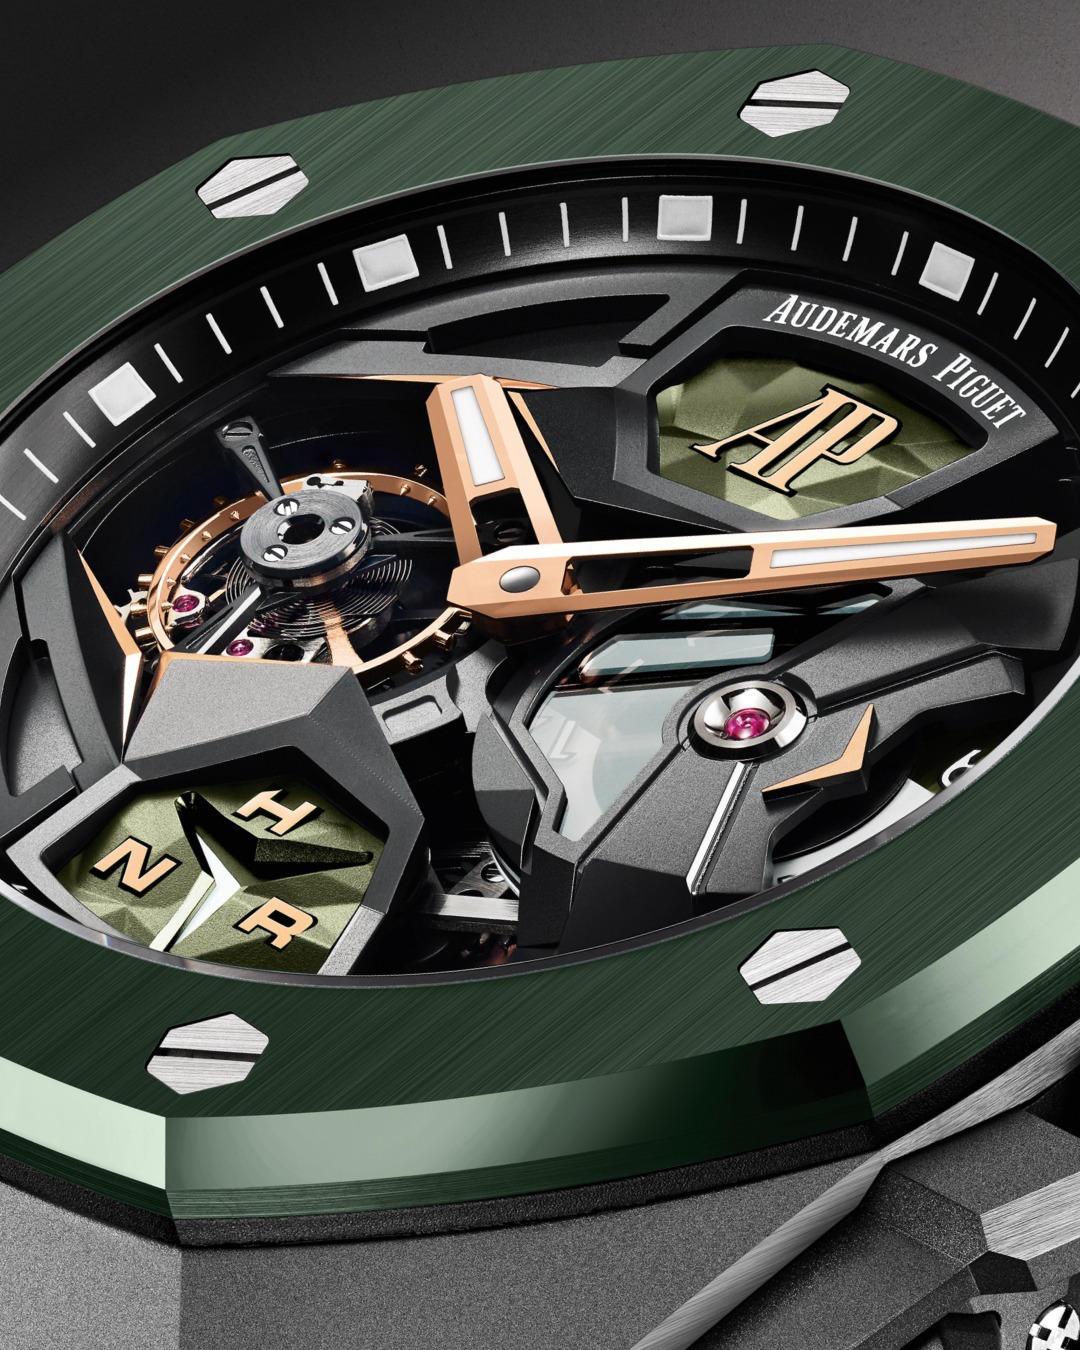 Audemars Piguet - Dressed in green for the first time